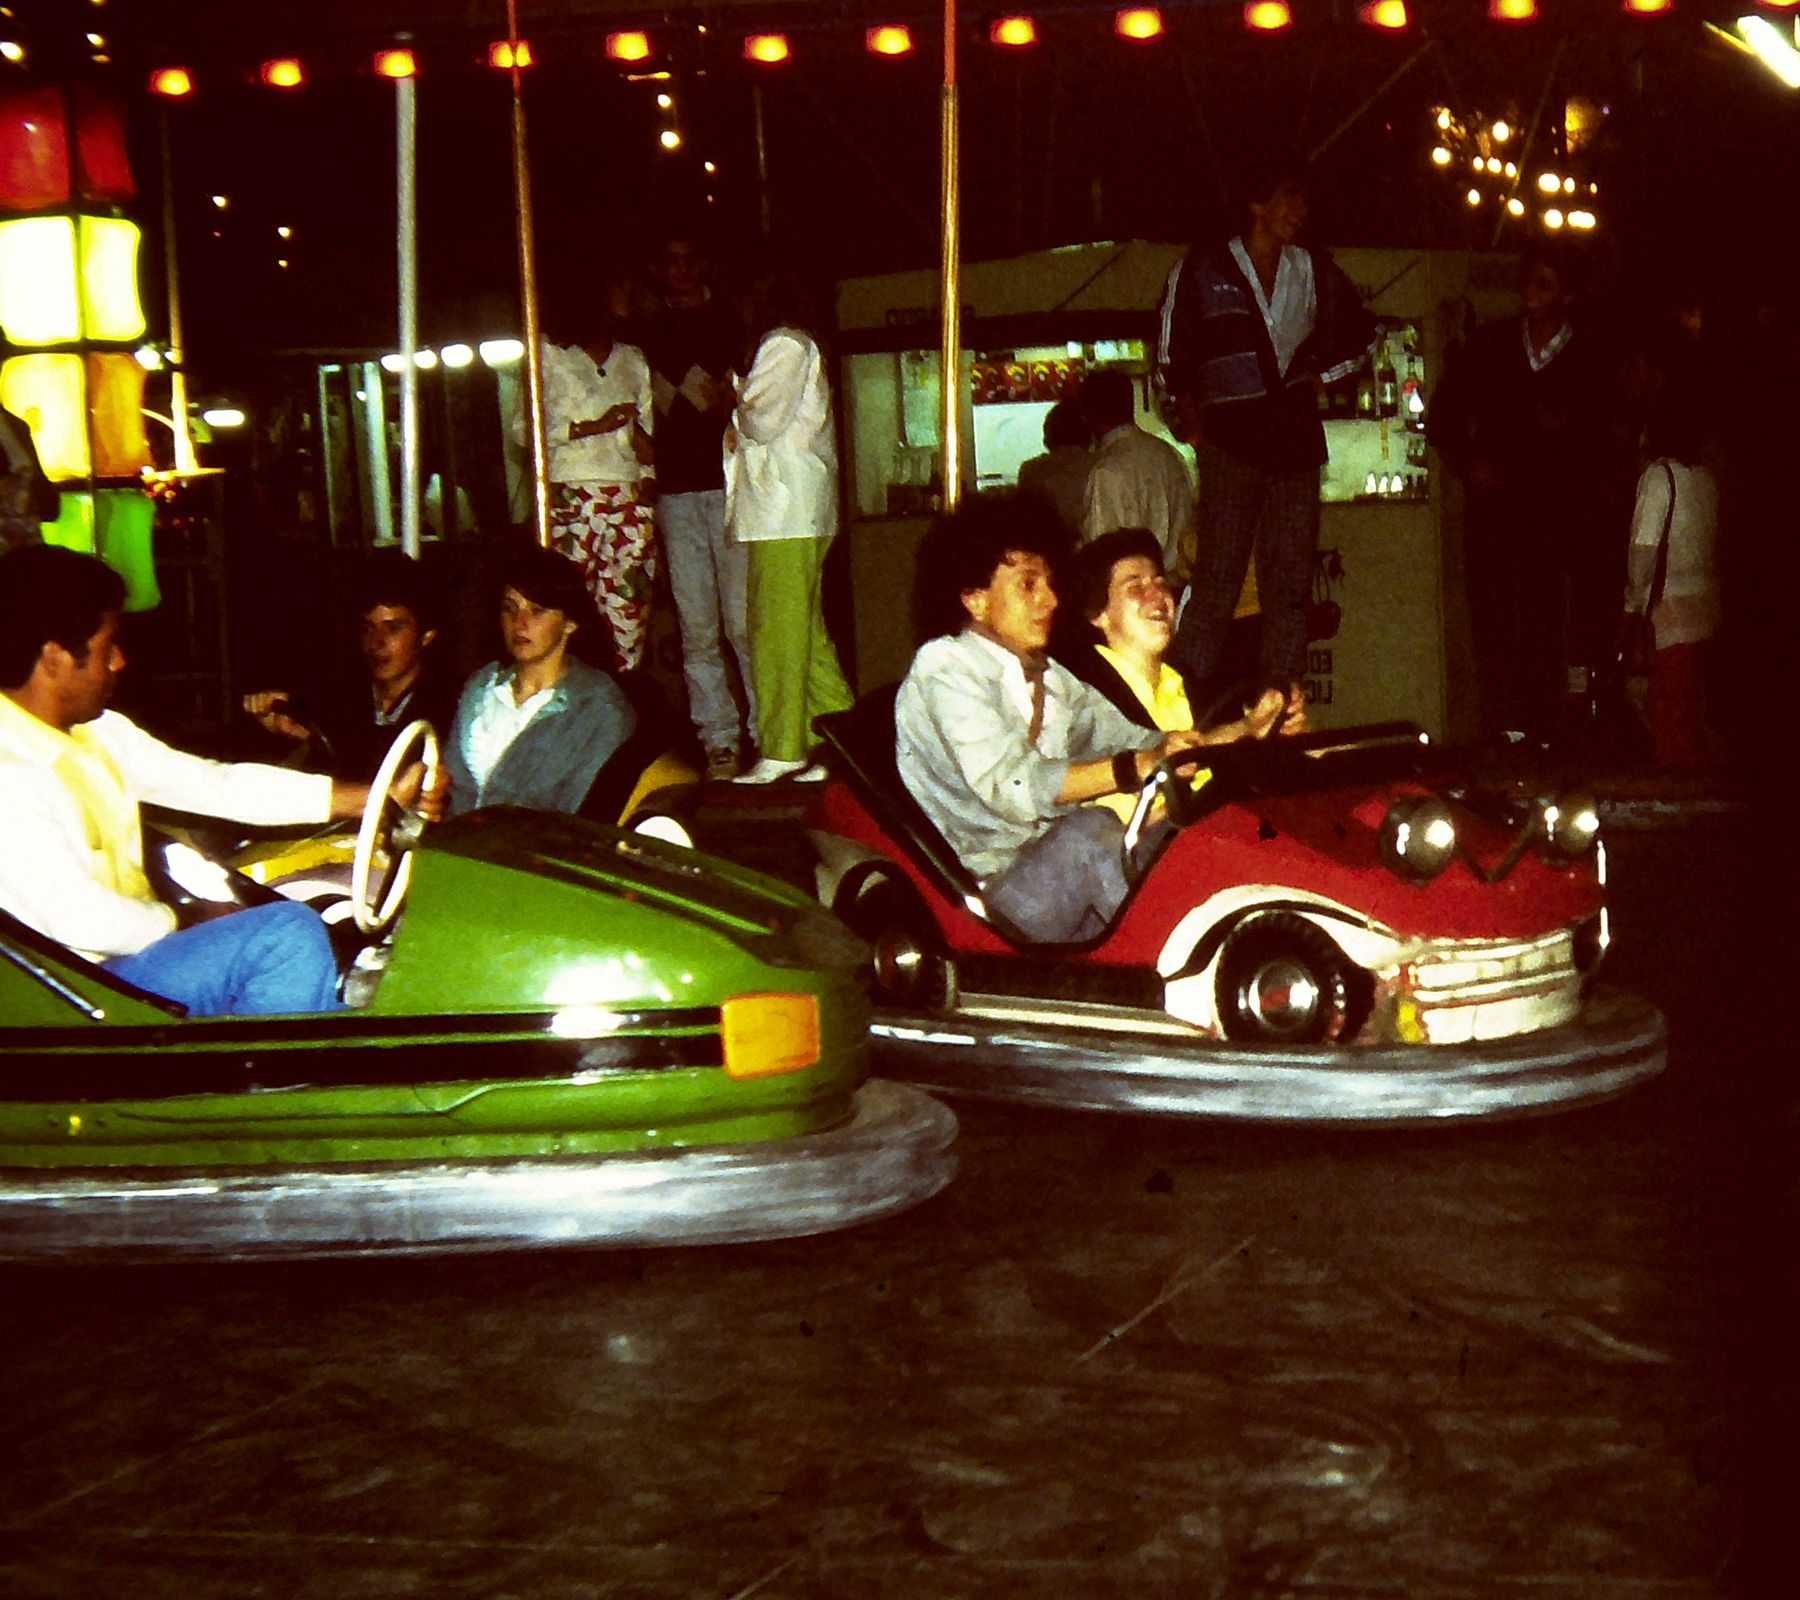 Jeffrey and student in bumper car